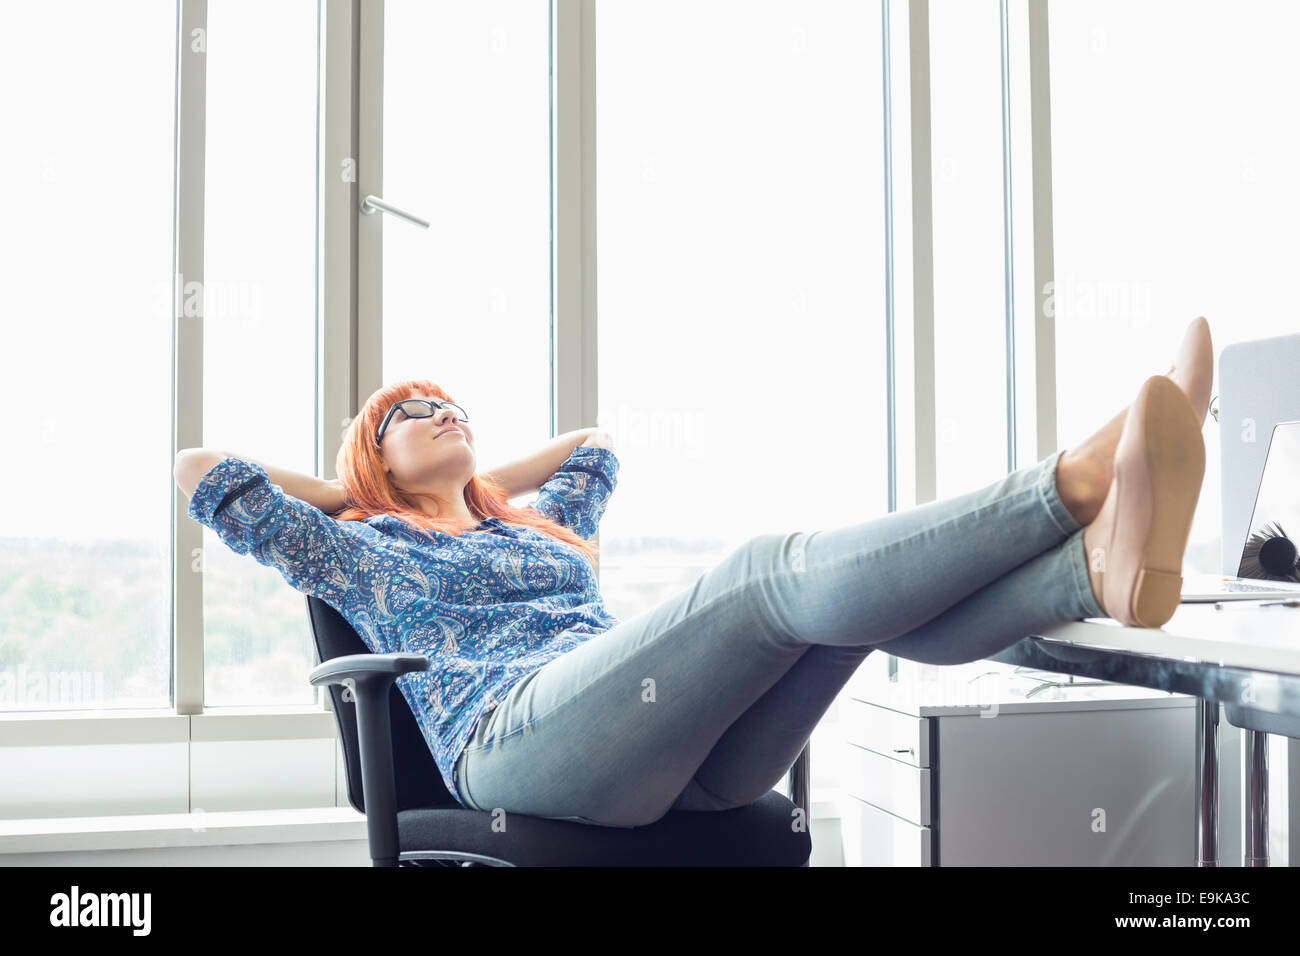 Full-length of businesswoman relaxing with feet up at desk in creative office Stock Photo